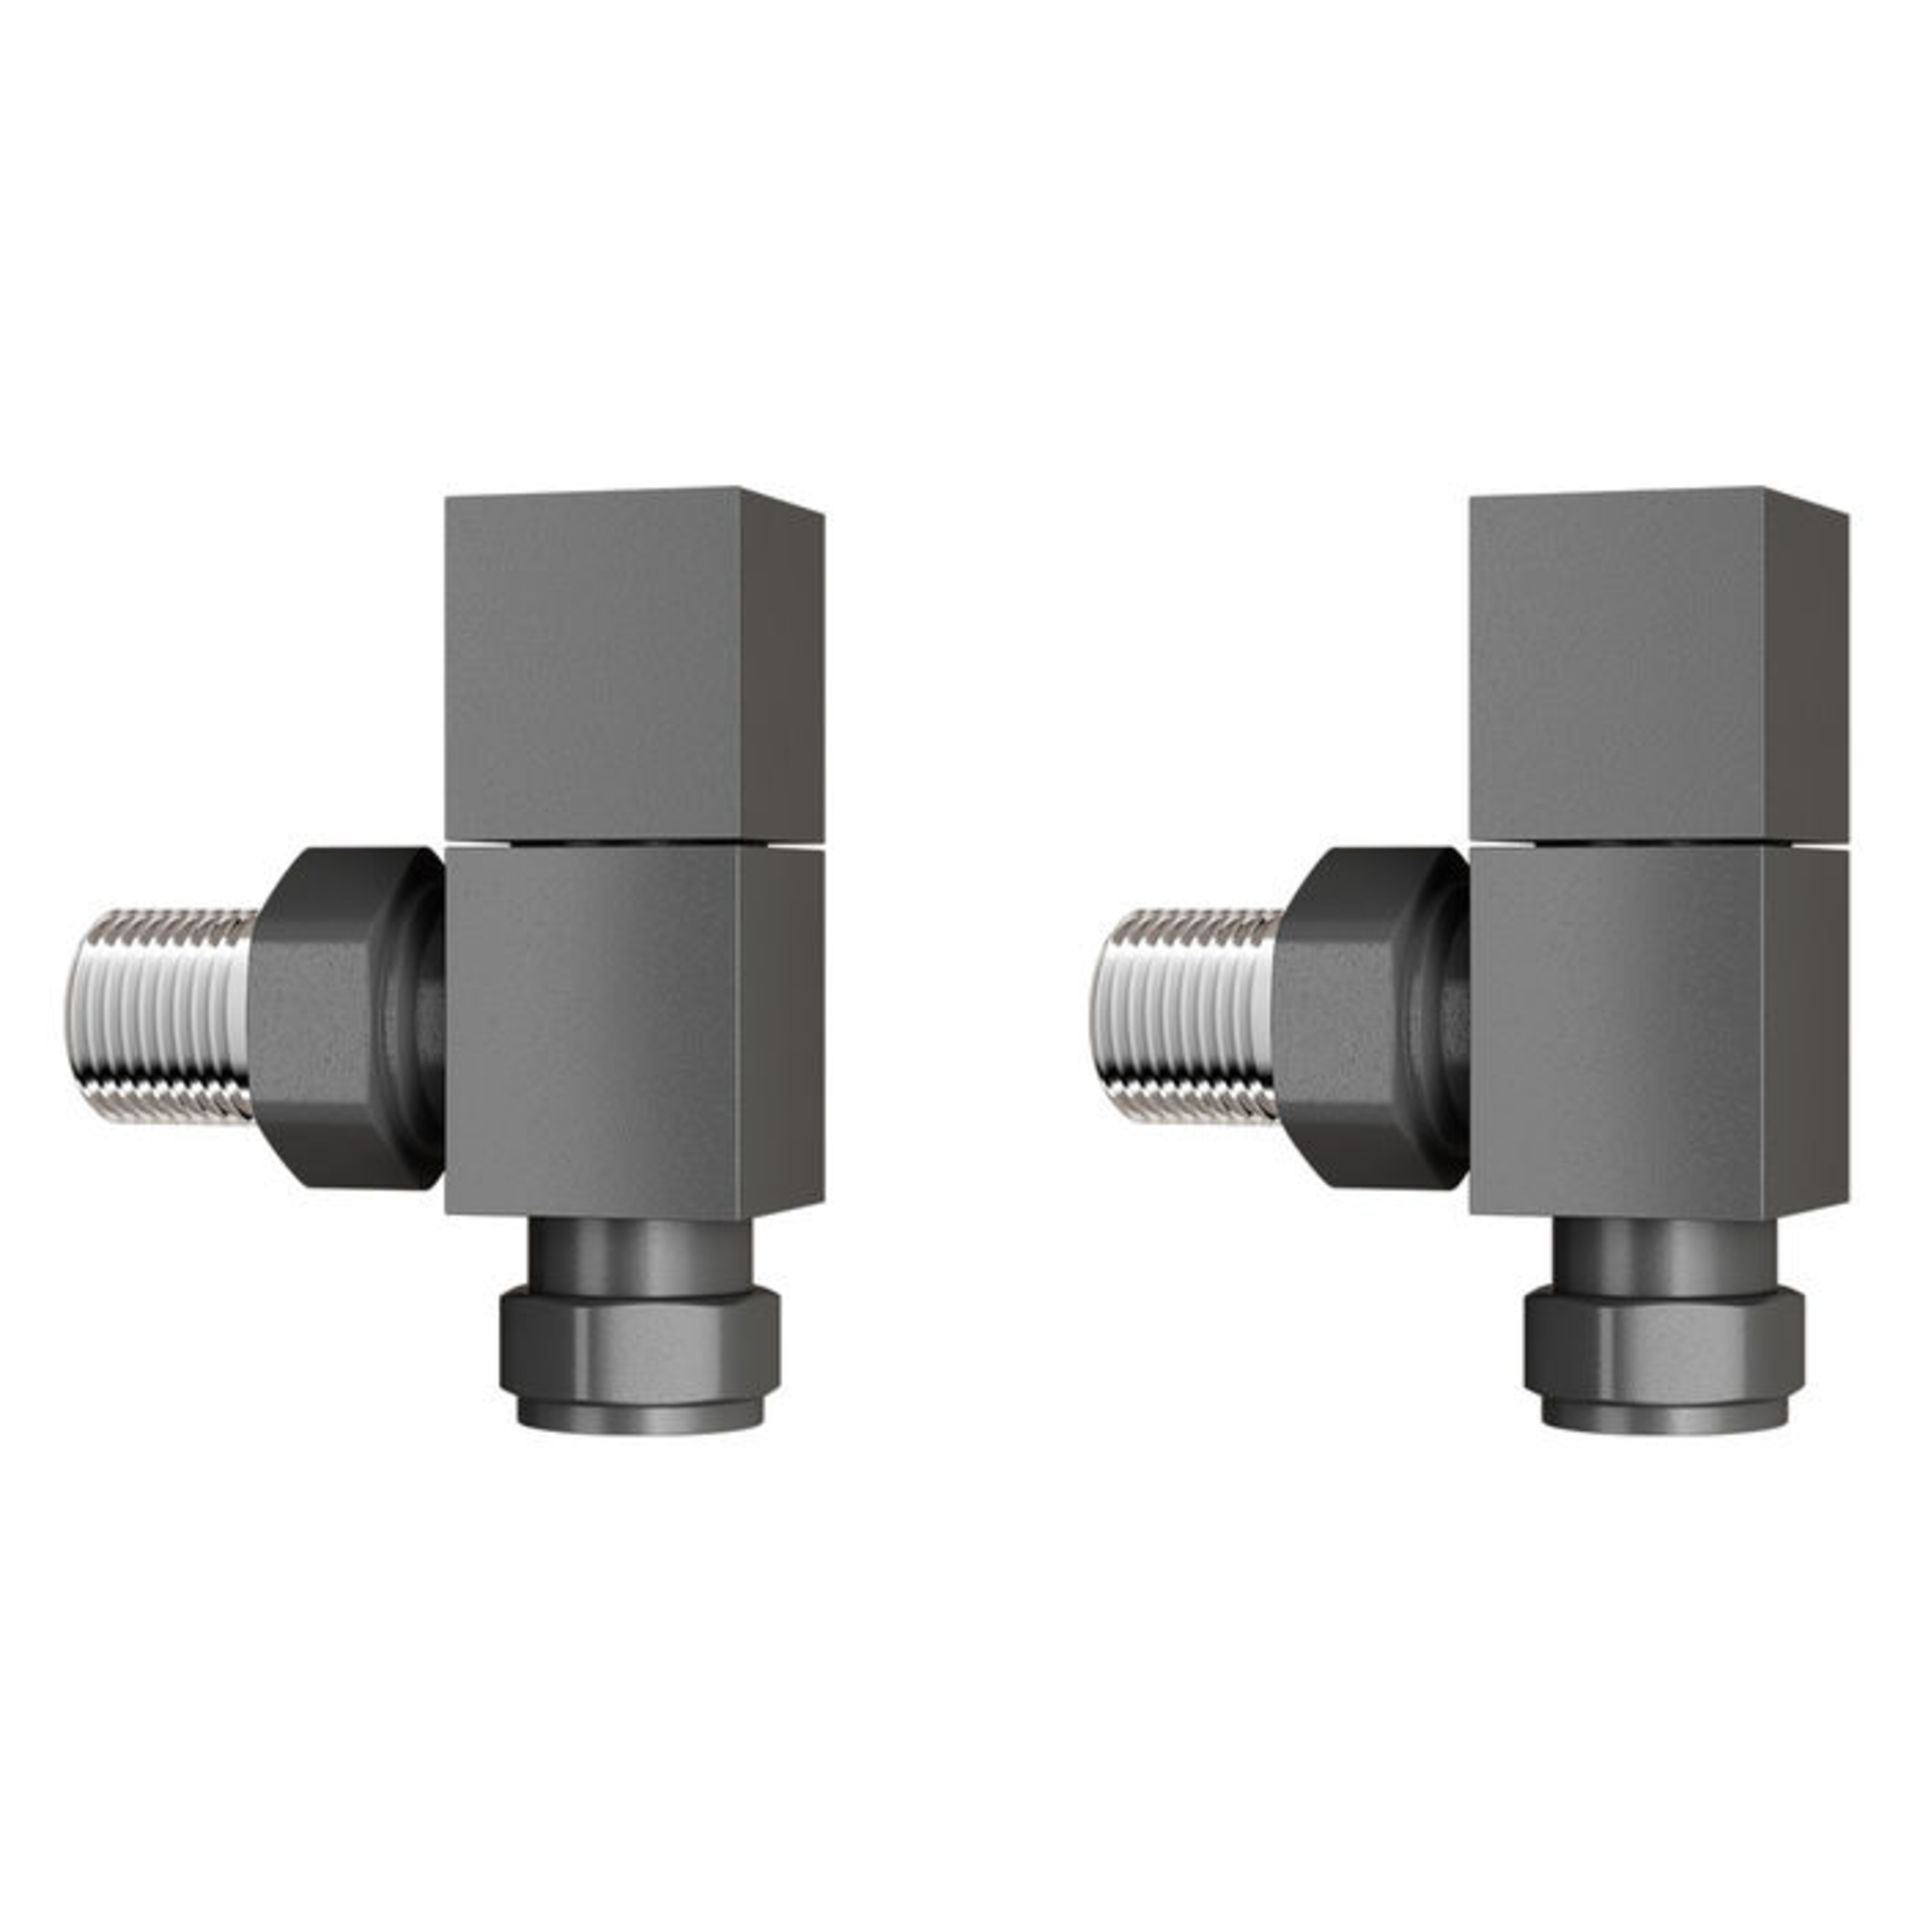 (AL93) 15mm Standard Connection Square Angled anthracite Radiator Valves Made of solid brass, our